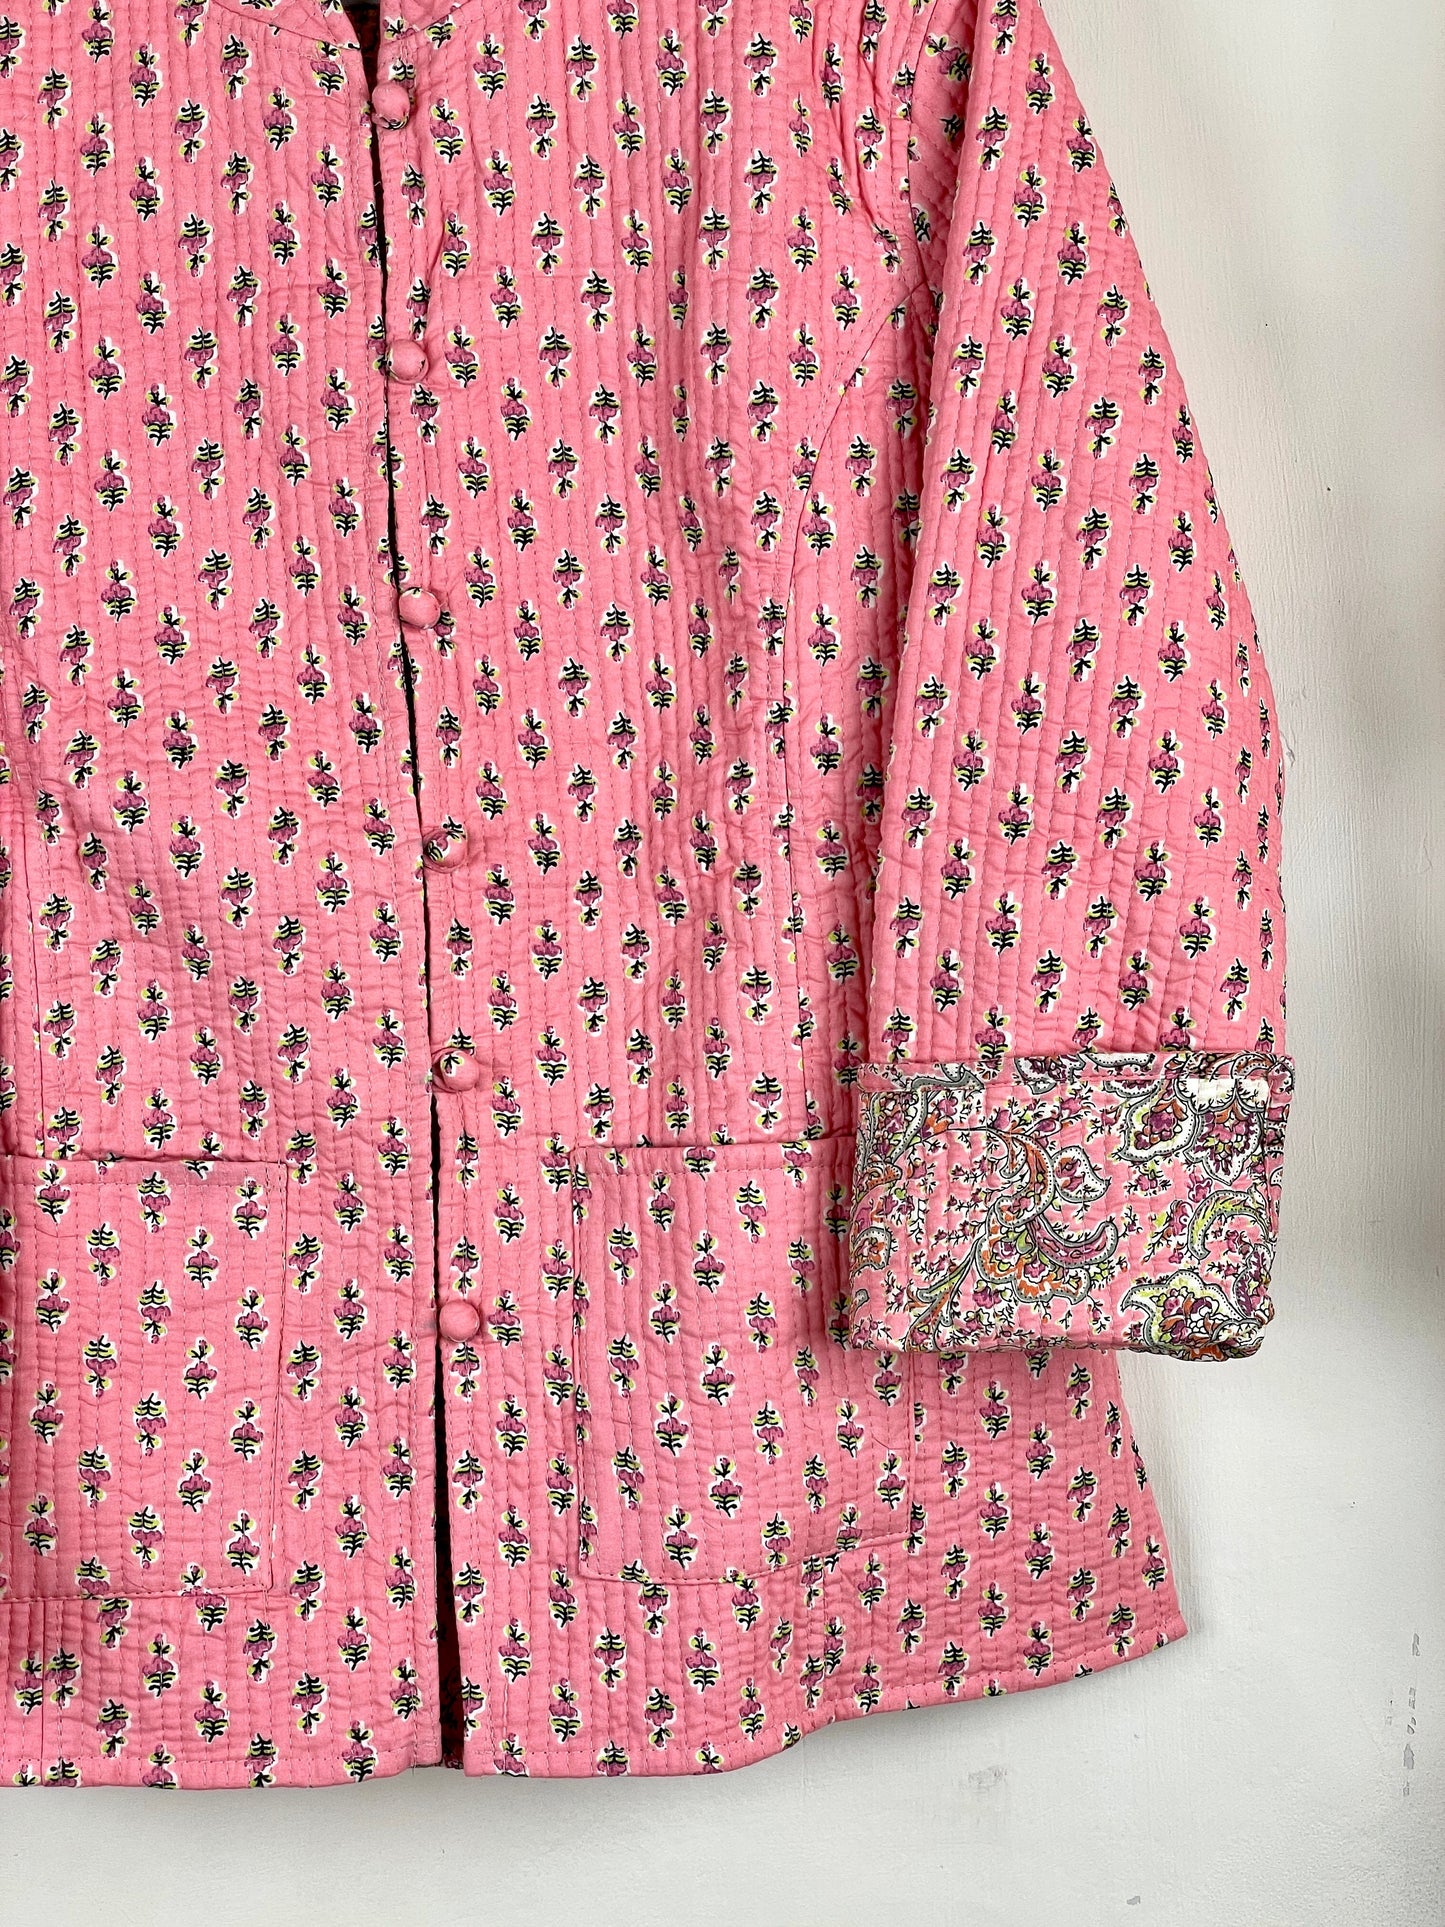 Indian Handmade Quilted Cotton Fabric Jacket Stylish Pink Floral Women's Coat, Reversible Waistcoat, Christmas Gift for Her